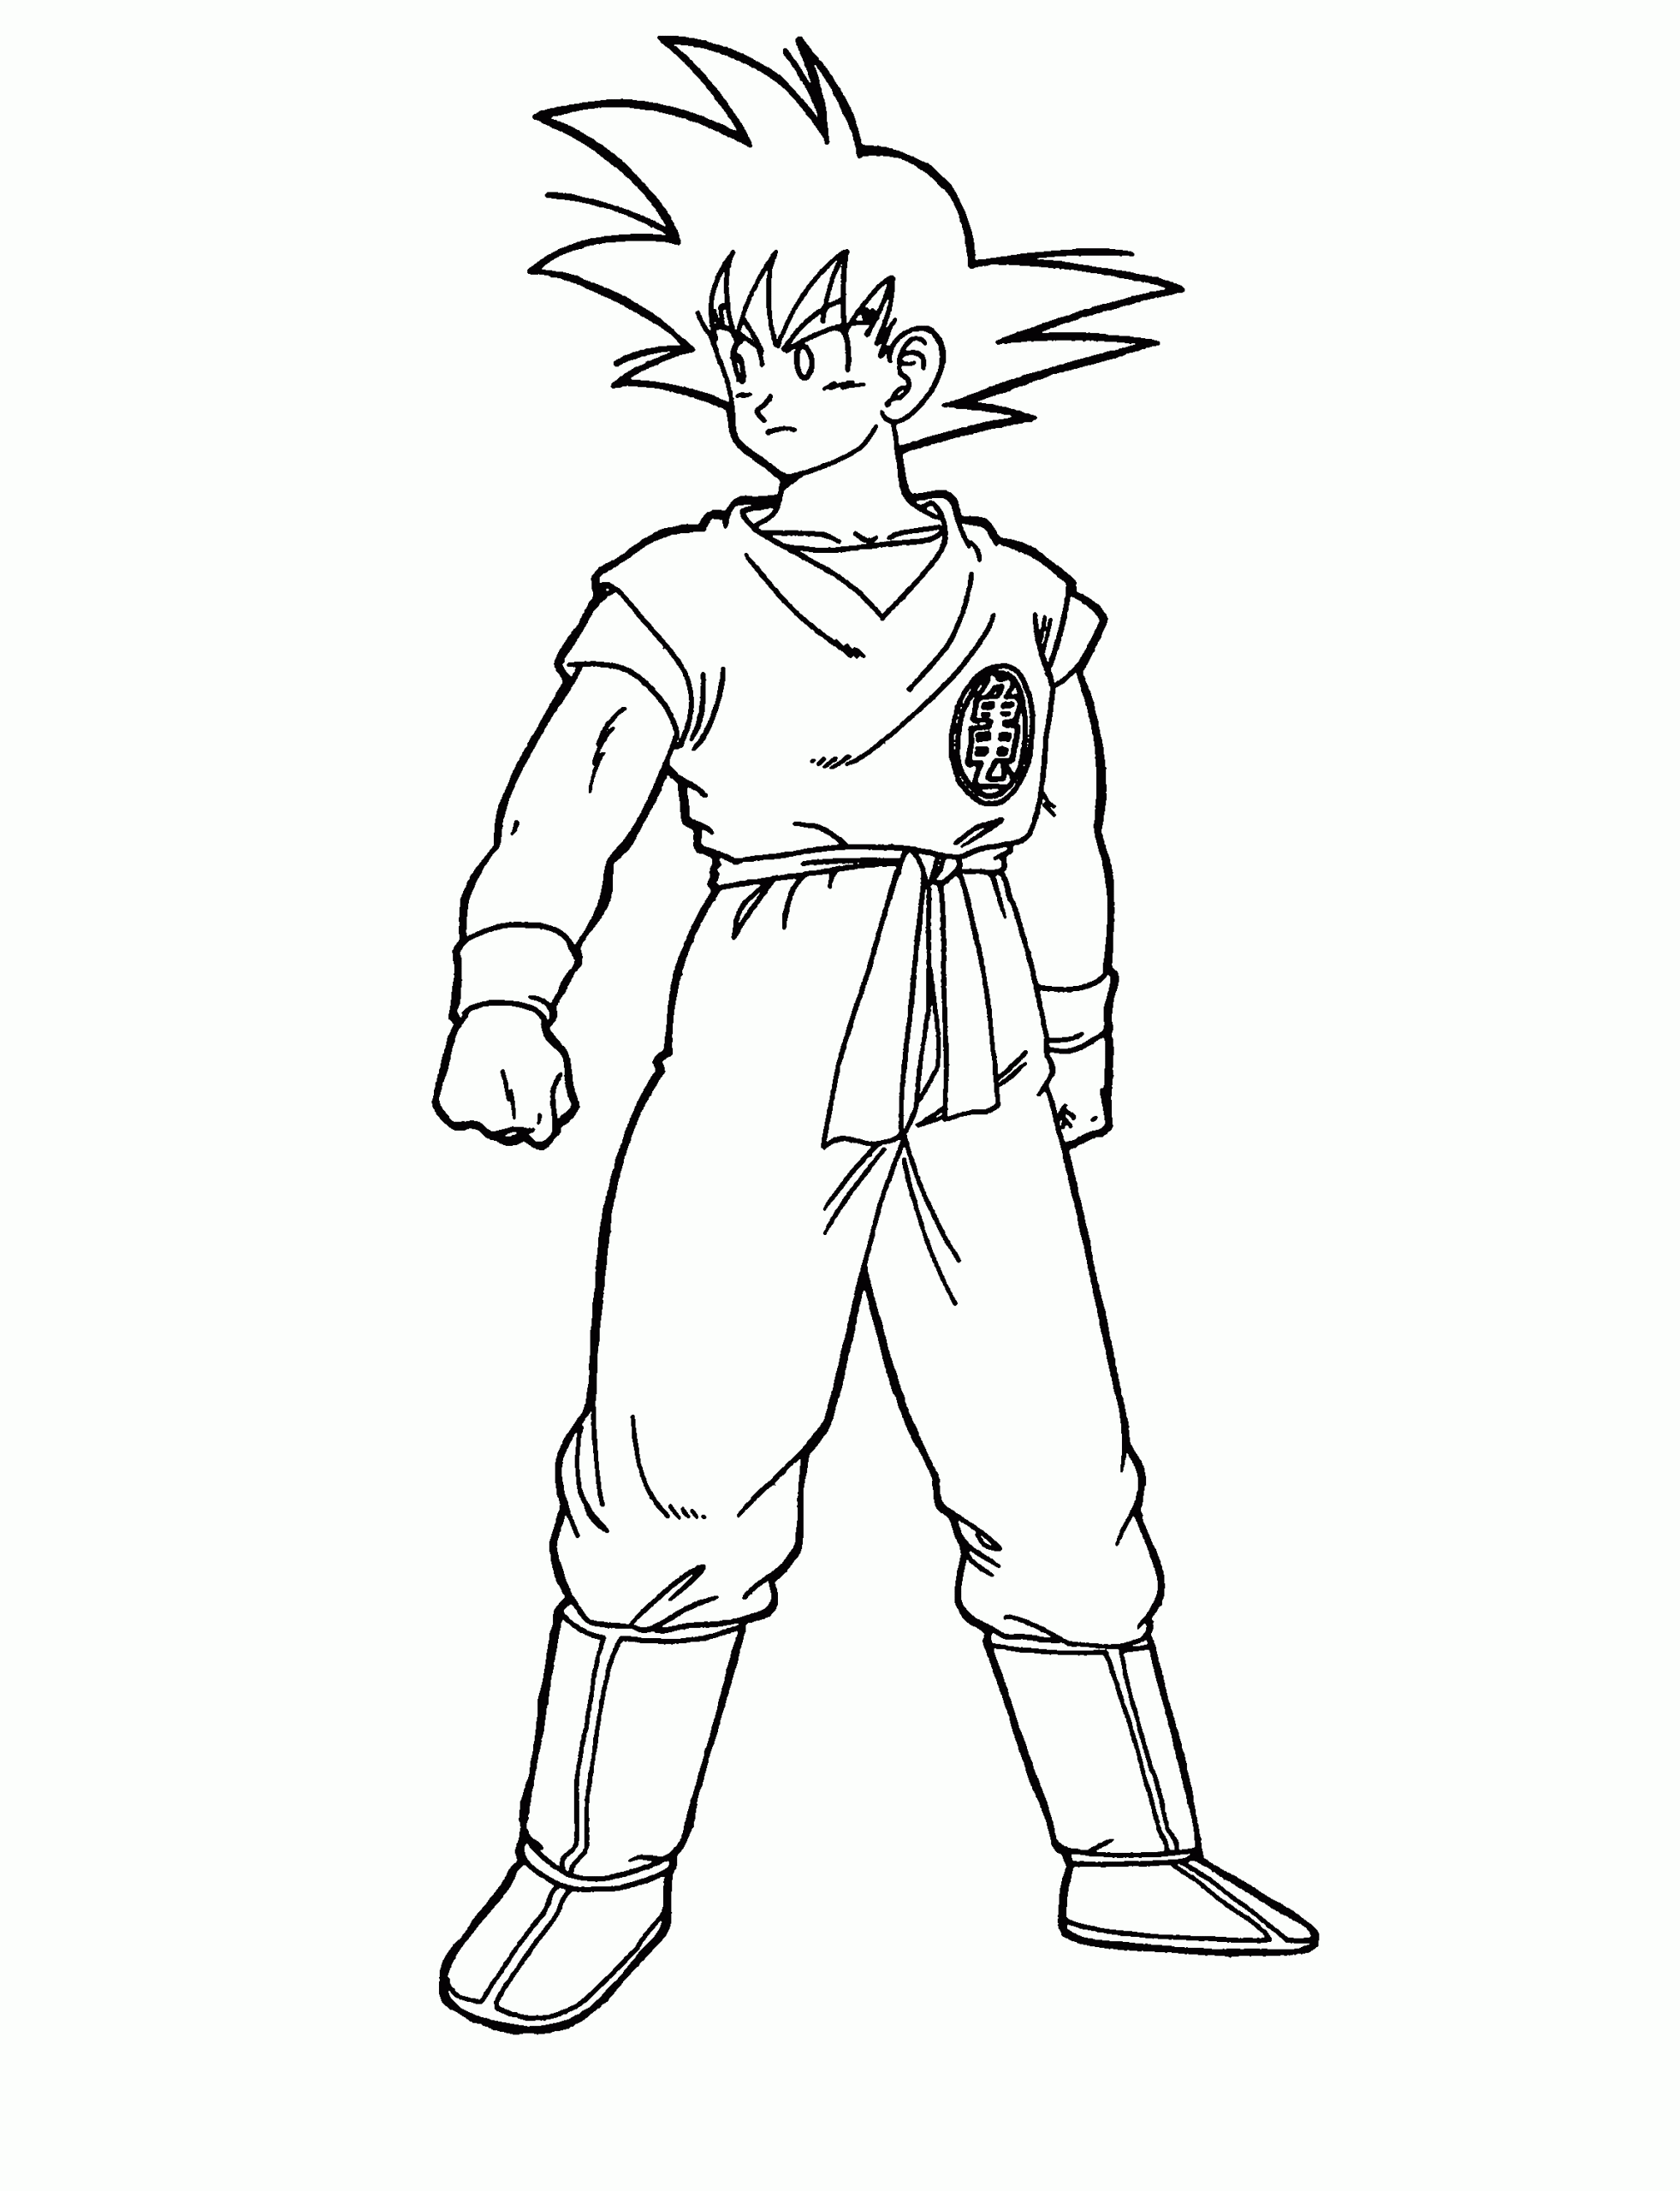 Goku Coloring Pages   Free Printable Coloring Pages for Kids